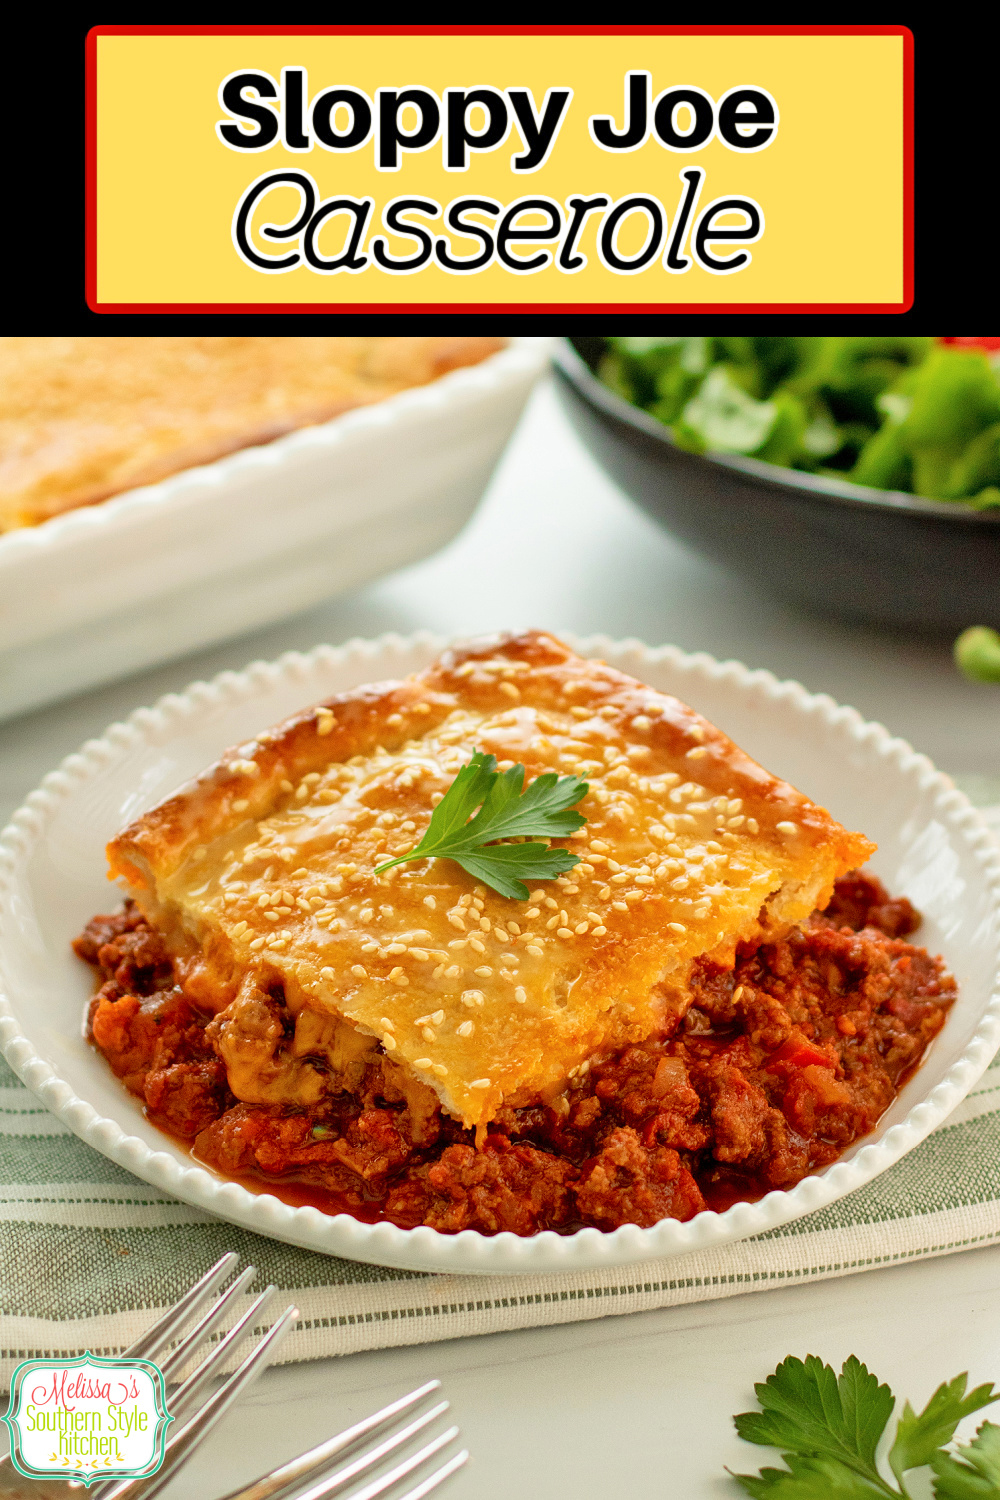 This easy Sloppy Joe Casserole recipe is a mouthwatering way to enjoy downhome flavors in a family style meal #sloppyjoes #casseroles #casserolerecipes #easygroundbeefrecipes #sloppyjoecasserole #easycasseroles #sloppyjoerecipe